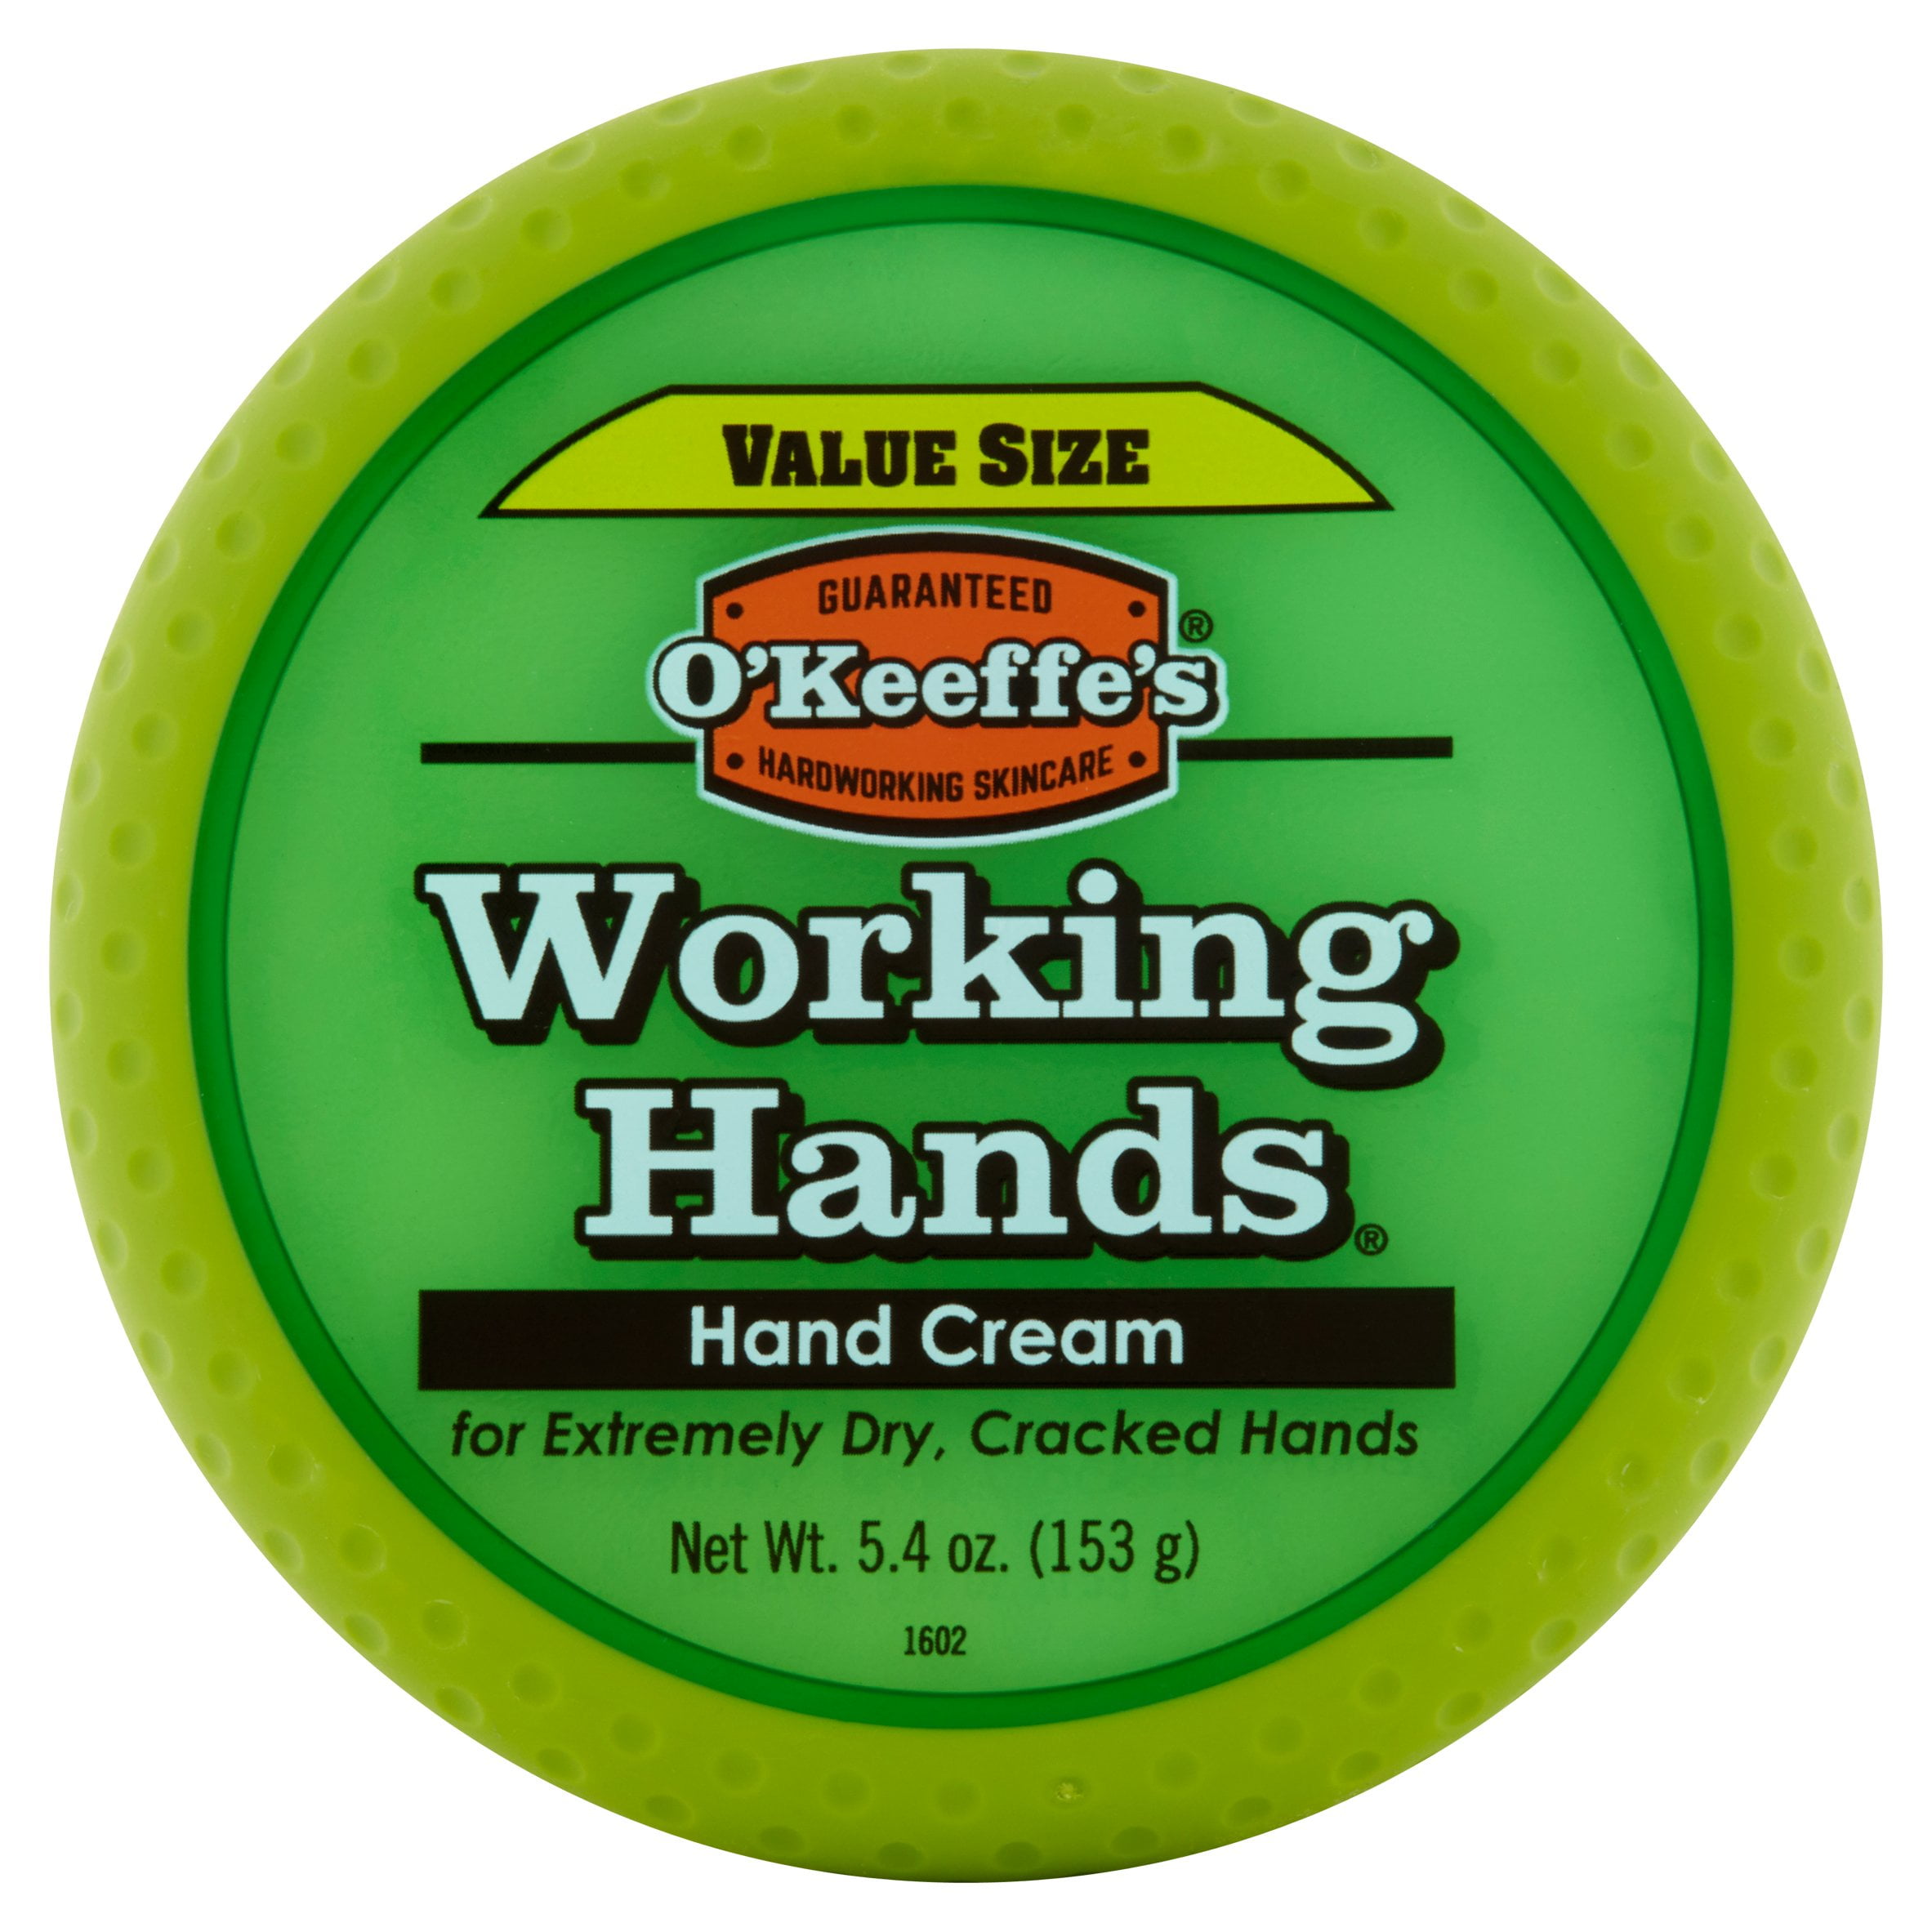 O'Keeffe's Working Hands Hand Cream, 5.4 oz, O'Keeffe's, 722510054006, Beauty/Bath & Body/Hand Creams Lotions, gluten free finder, vervet, food scanner, veteterian, vegan, preservative, dairy, meat/seafood, egg